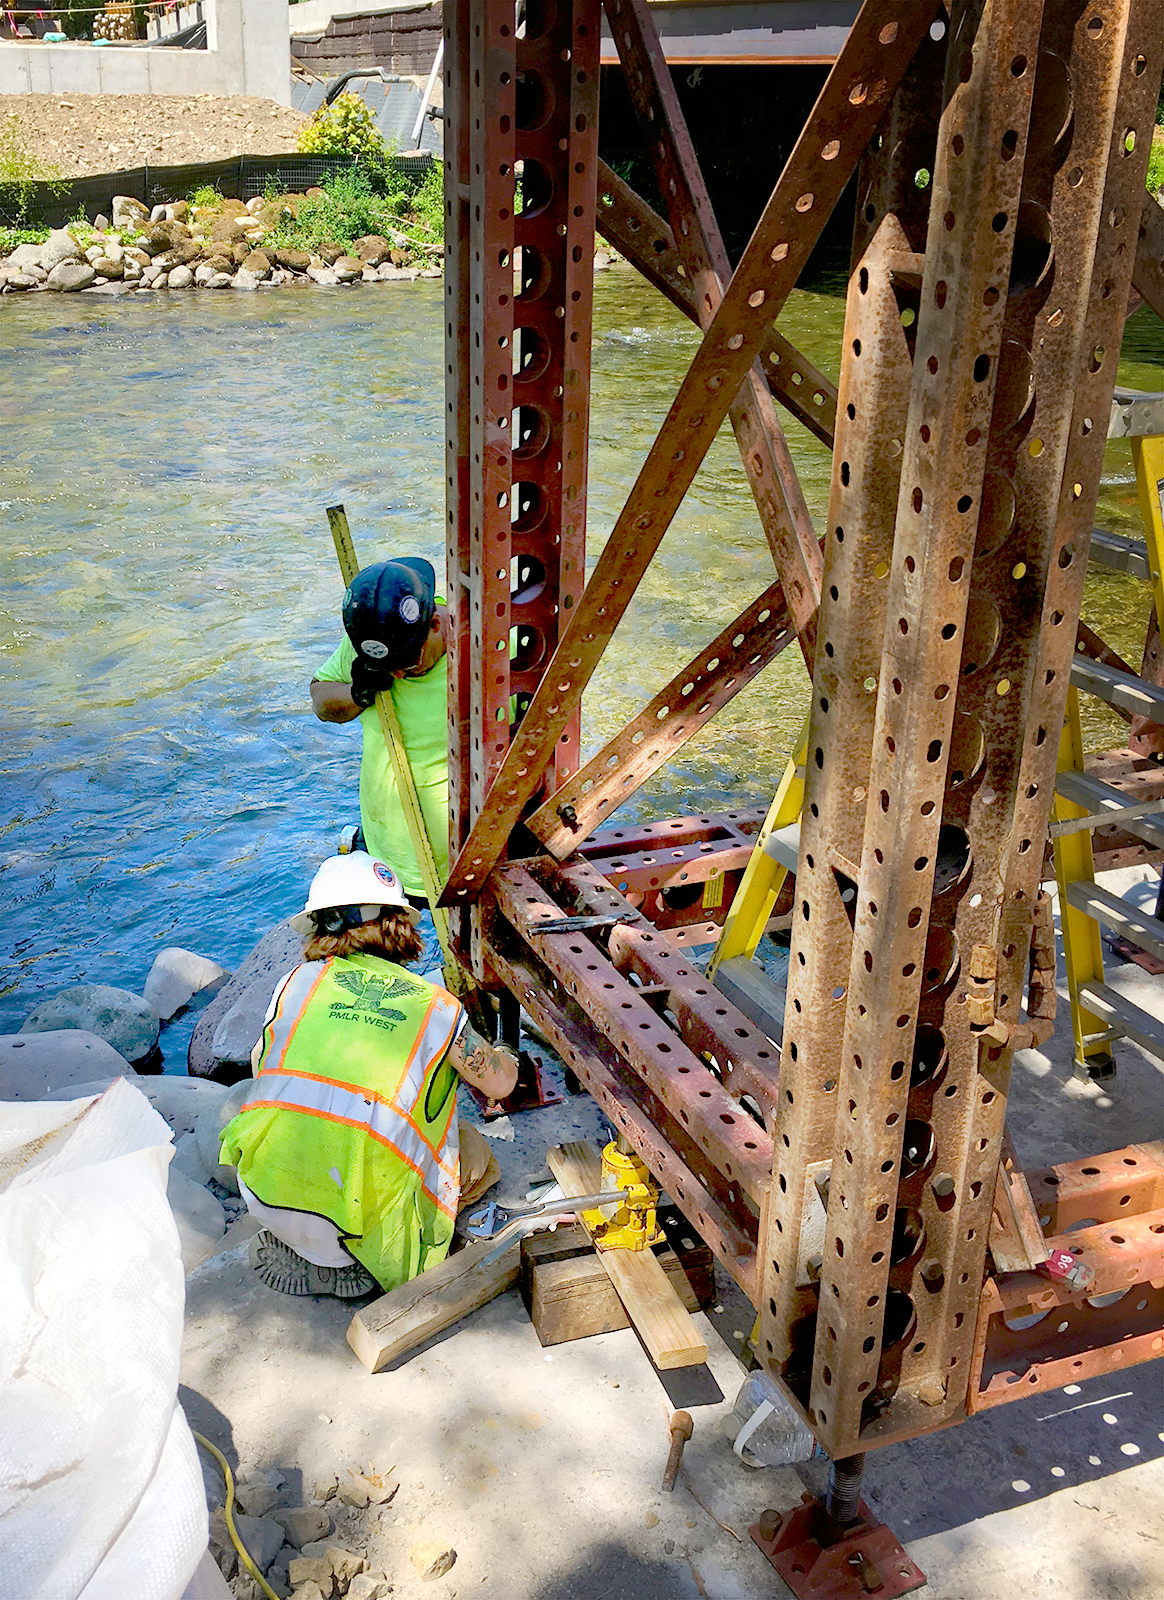 Construction workers repairing the supports of the bridge